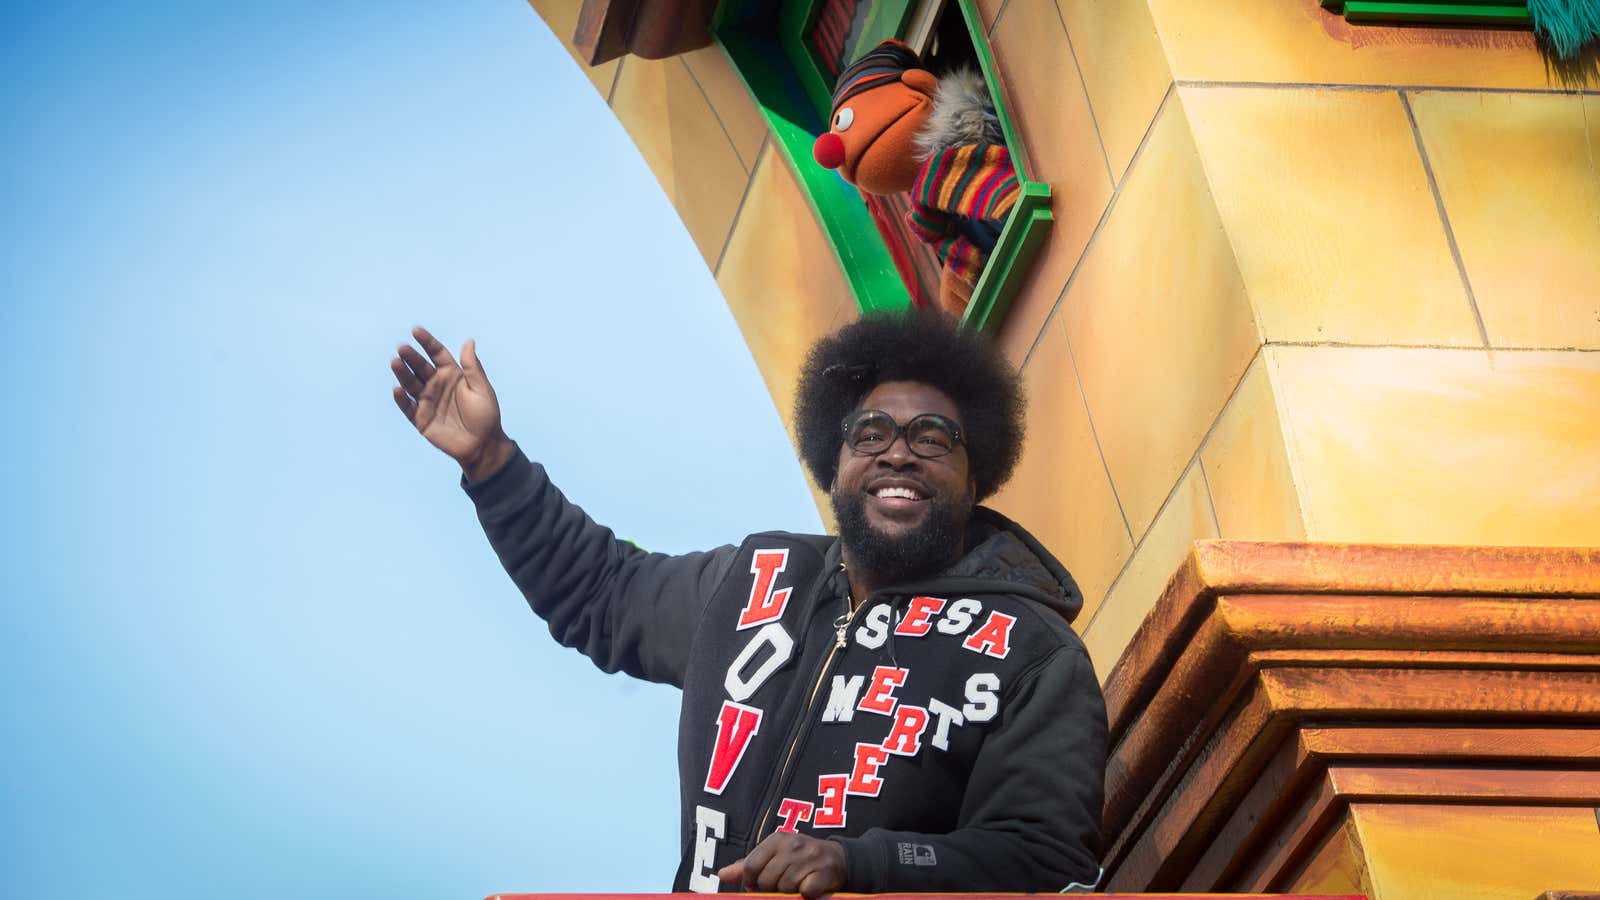 Questlove waves from a float during the Macy’s Thanksgiving Day Parade, Thursday, Nov. 26, 2015, in New York. (AP Photo/Bryan R. Smith)